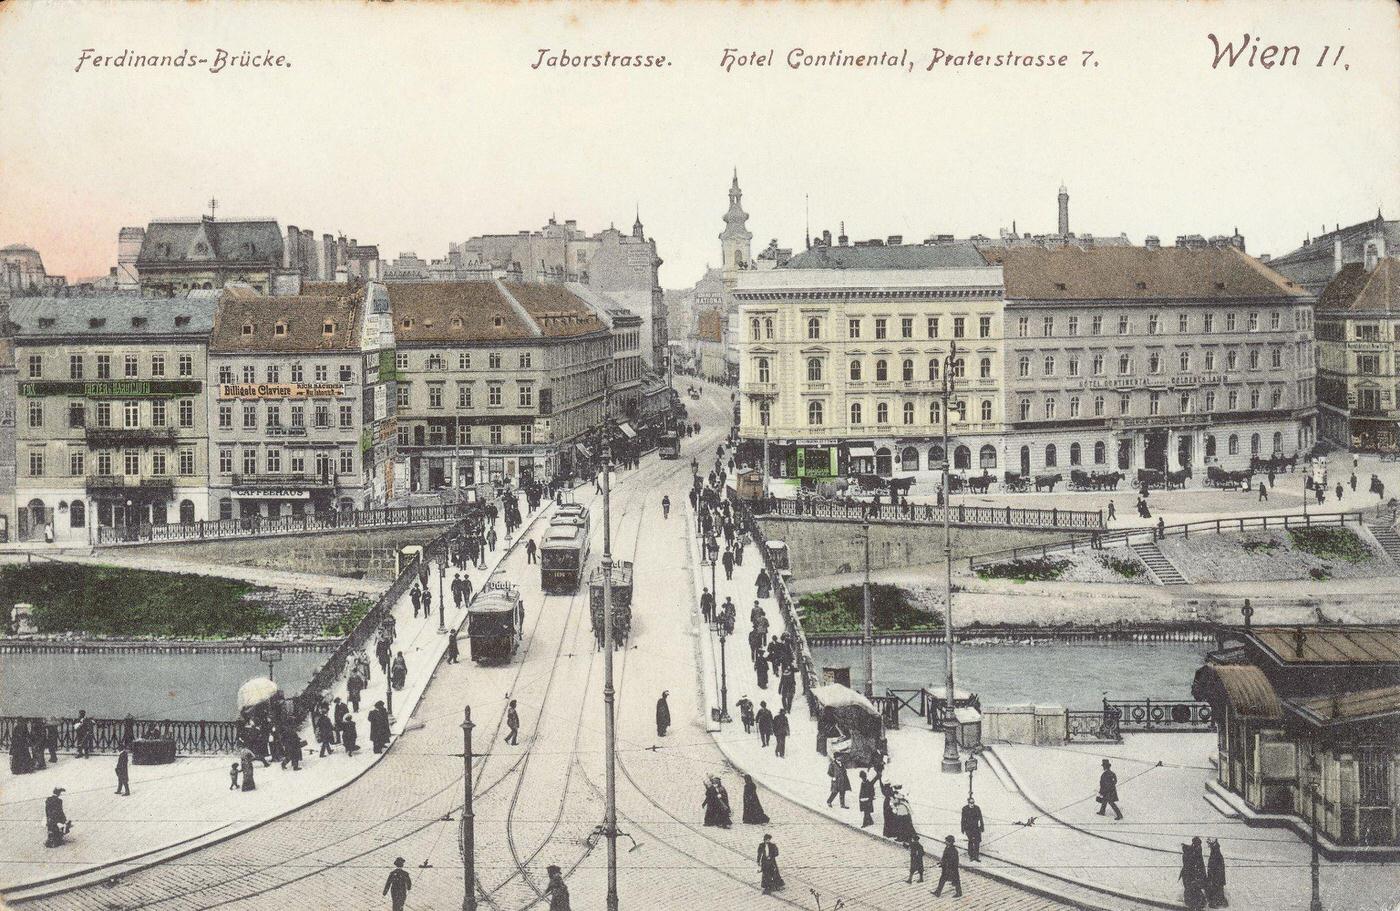 Ferdinandsbrücke (Bridge) over the Danube canal with Taborstrasse and Hotel Continental in the background, 1905.